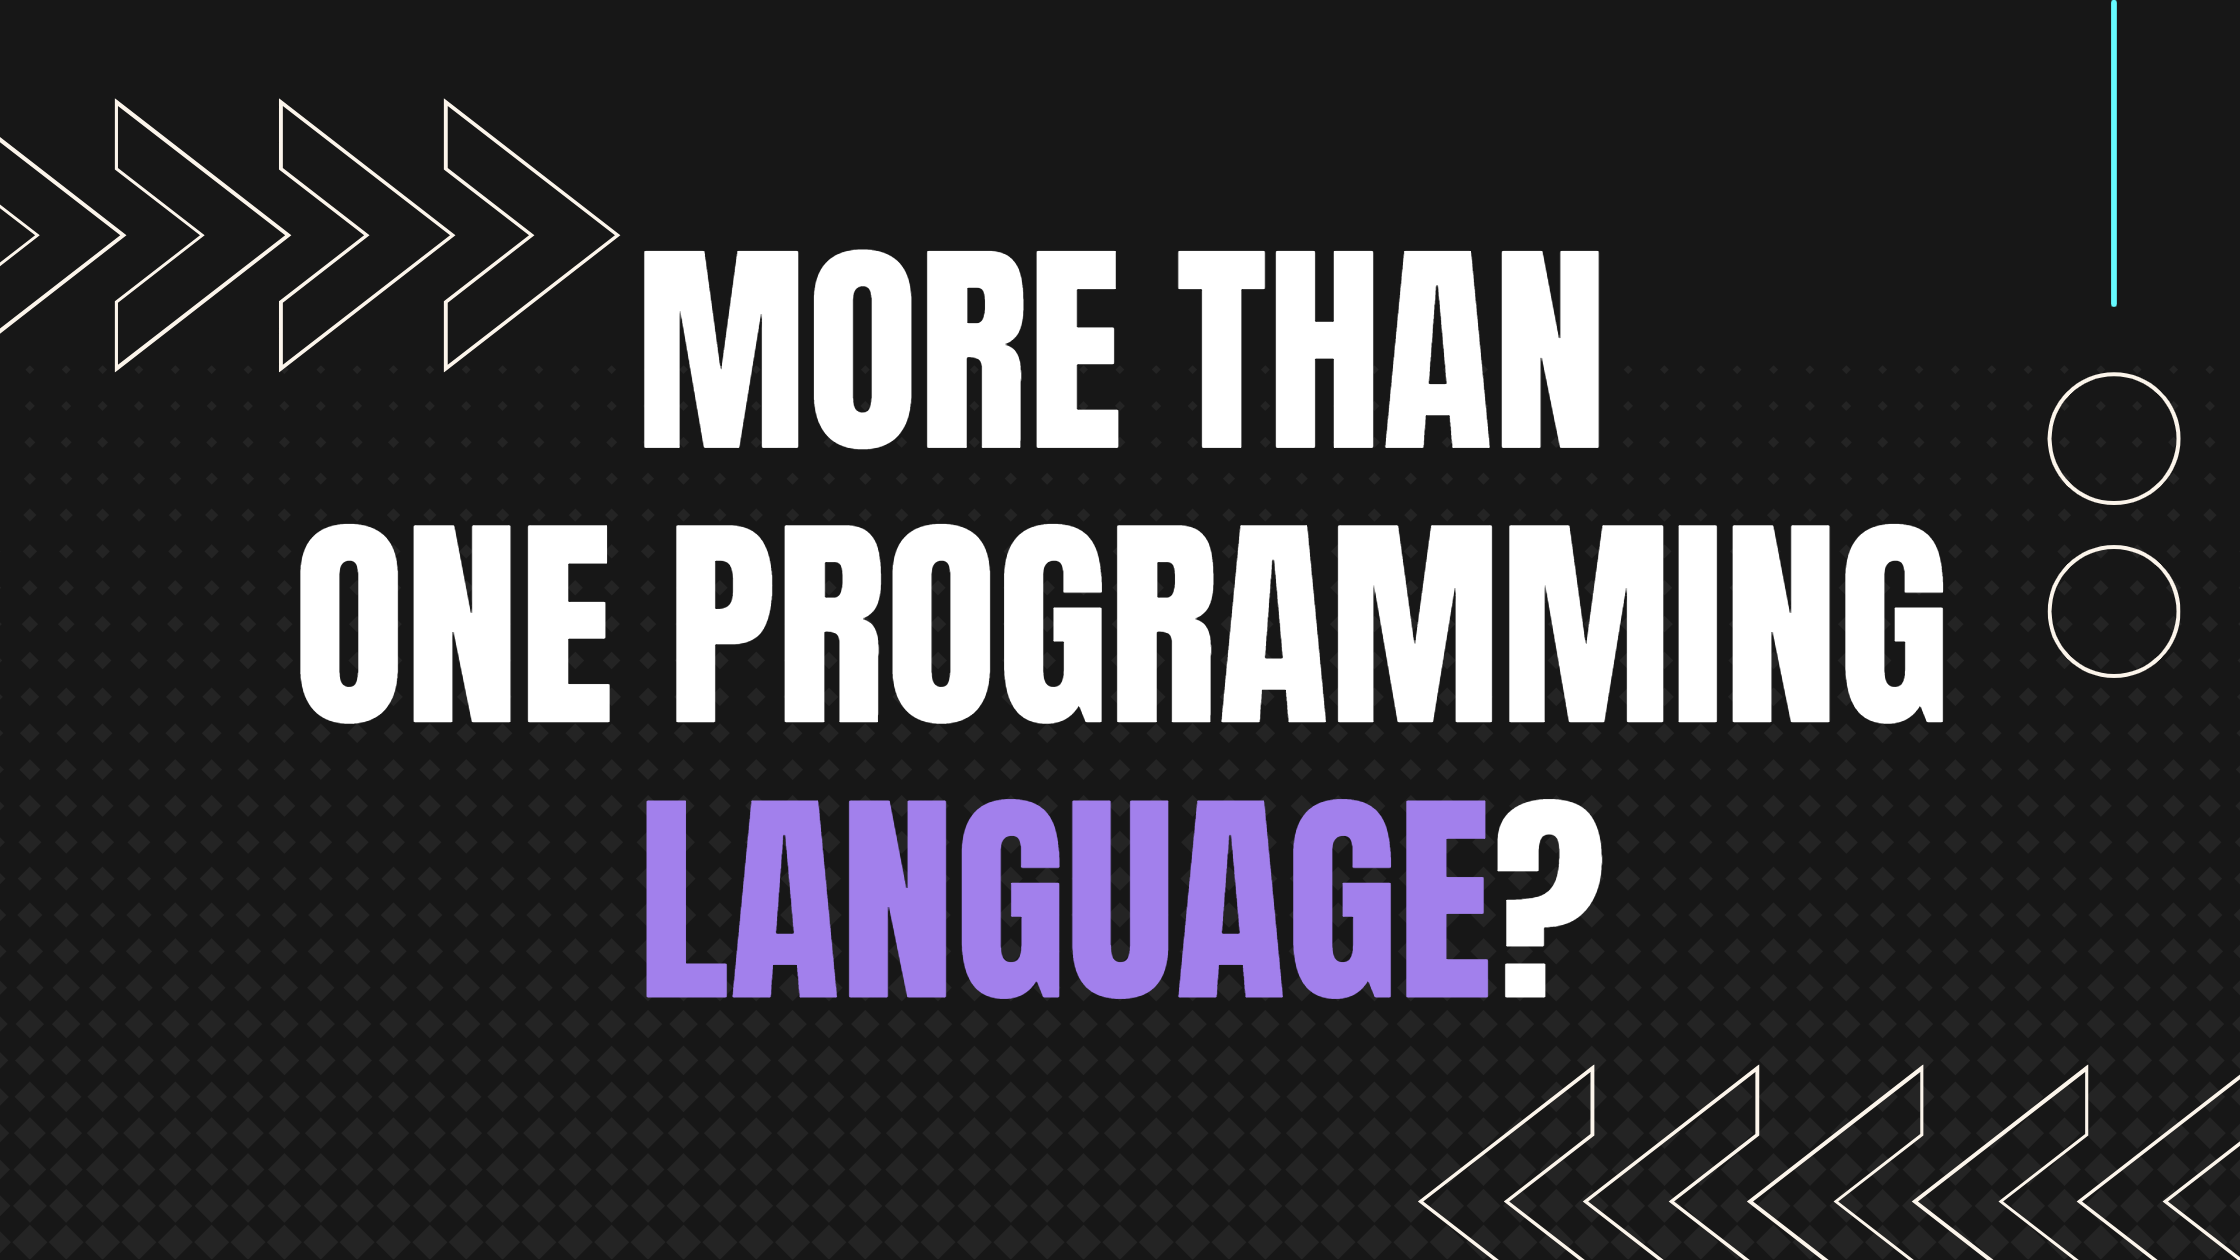 Why you don't need more than one programming language